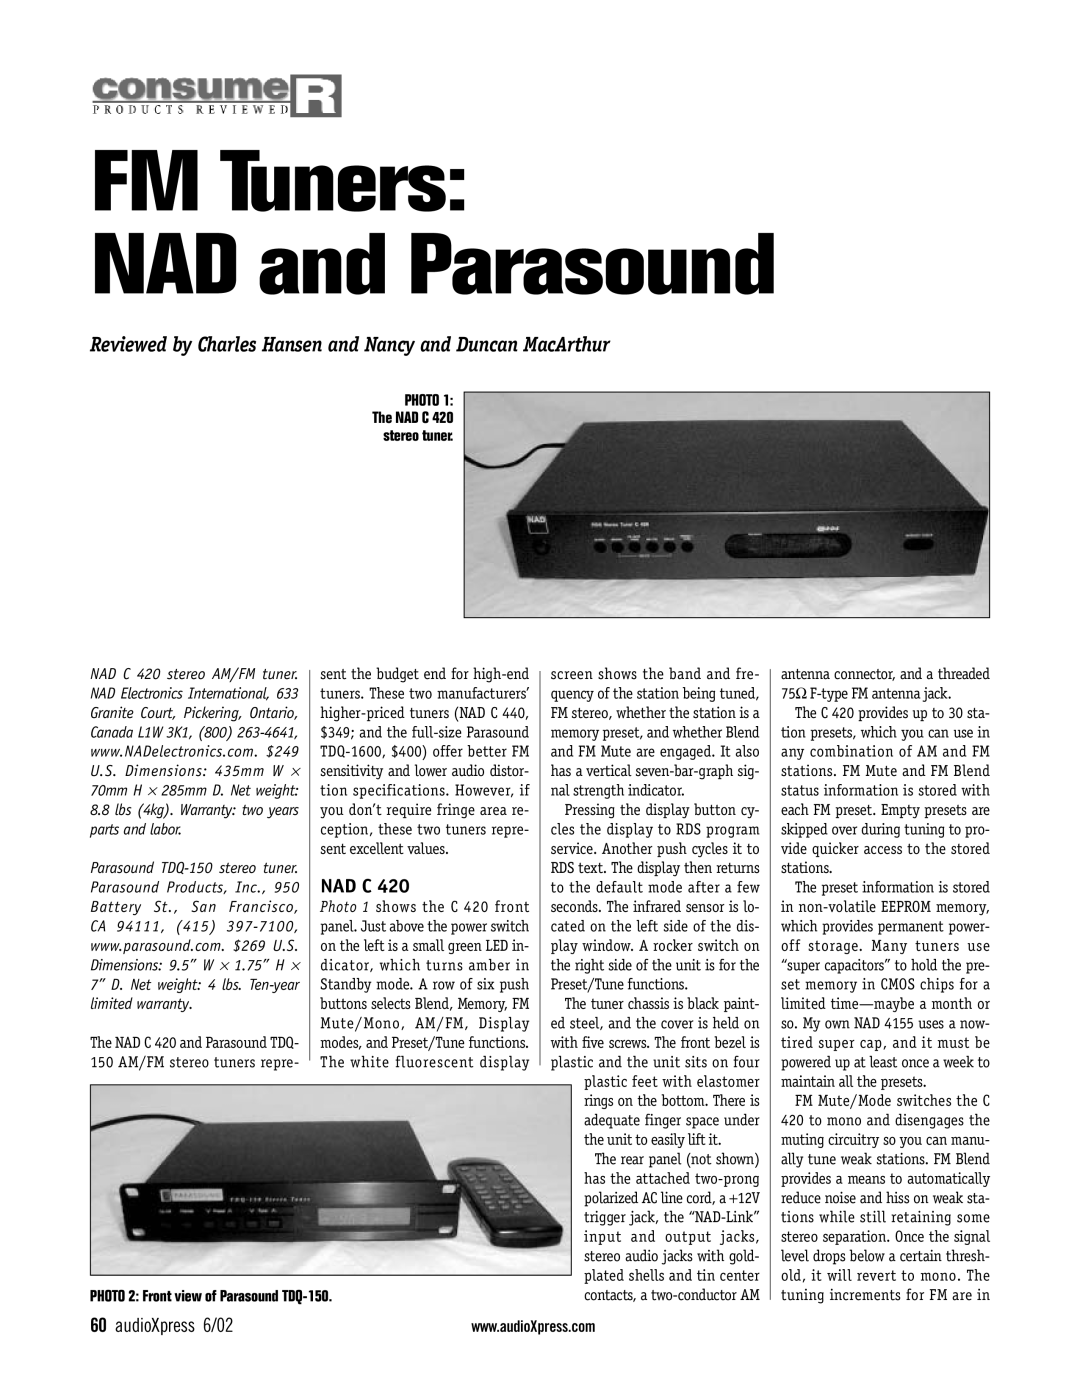 NAD C420 dimensions Nad C, audioXpress 6/02, PHOTO 2 Front view of Parasound TDQ-150, FM Tuners NAD and Parasound, Ca 